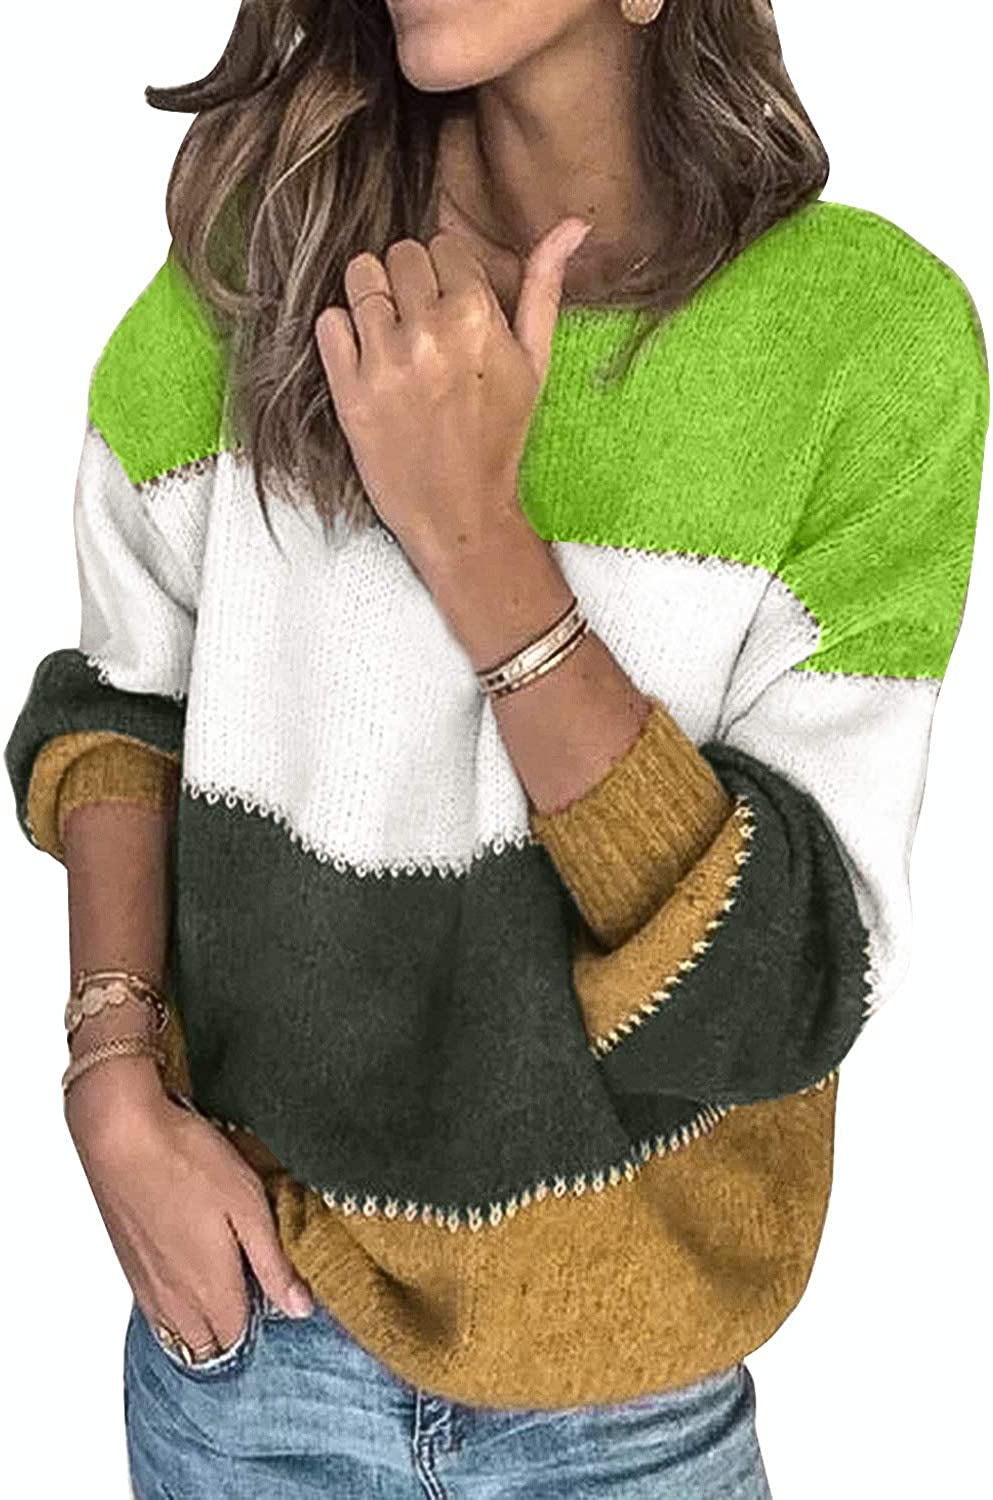 Womens Color Block Sweaters Long Sleeve Crewneck Pullover Knit Jumper Tops